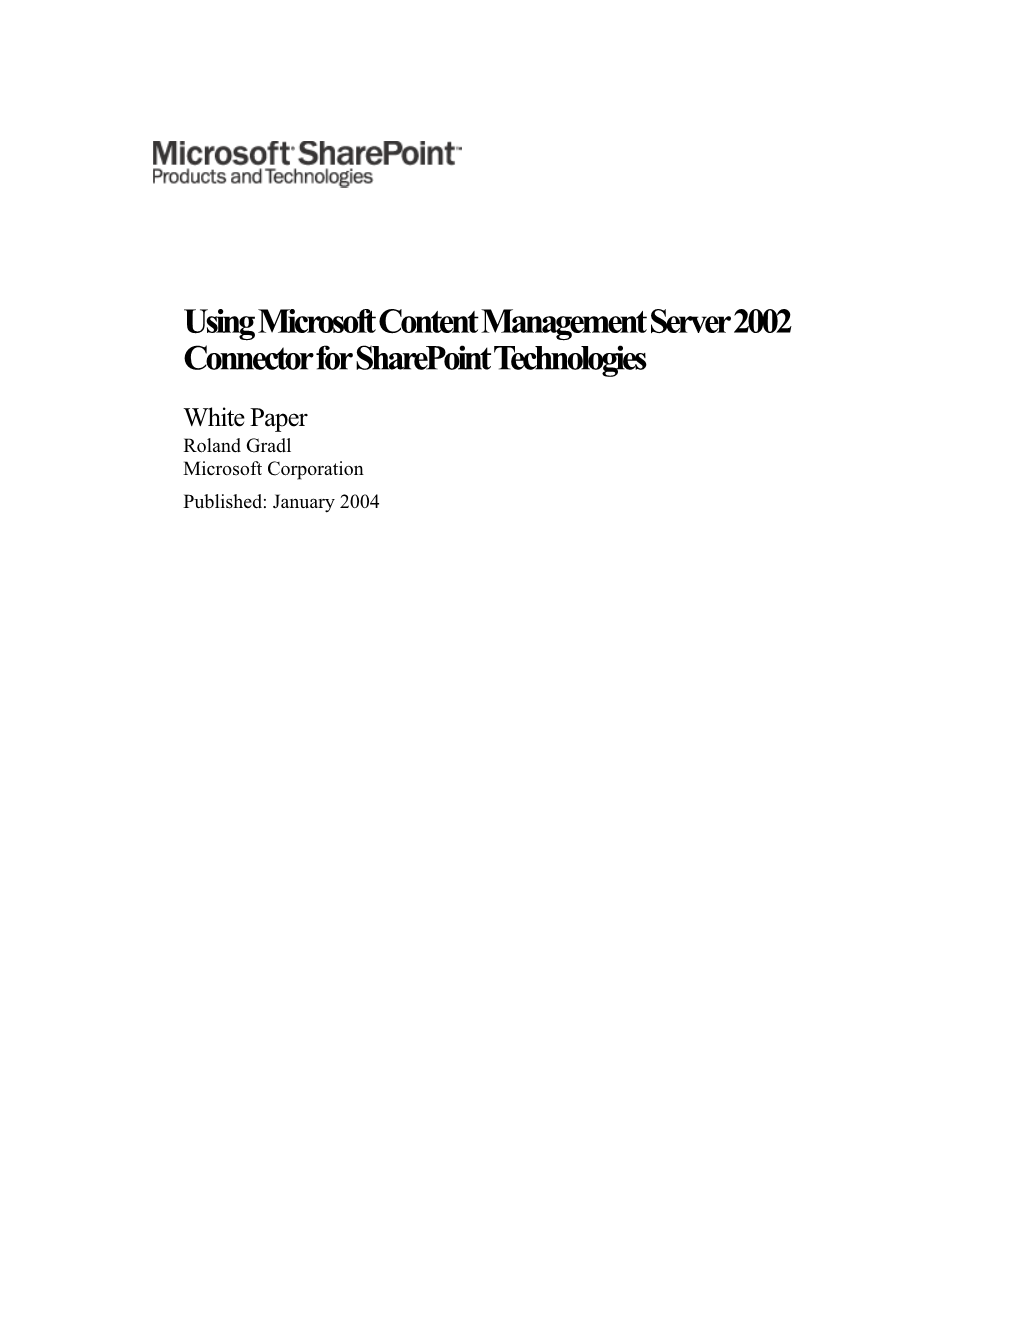 Using Microsoft Content Management Server 2002 Connector for Sharepoint Technologies